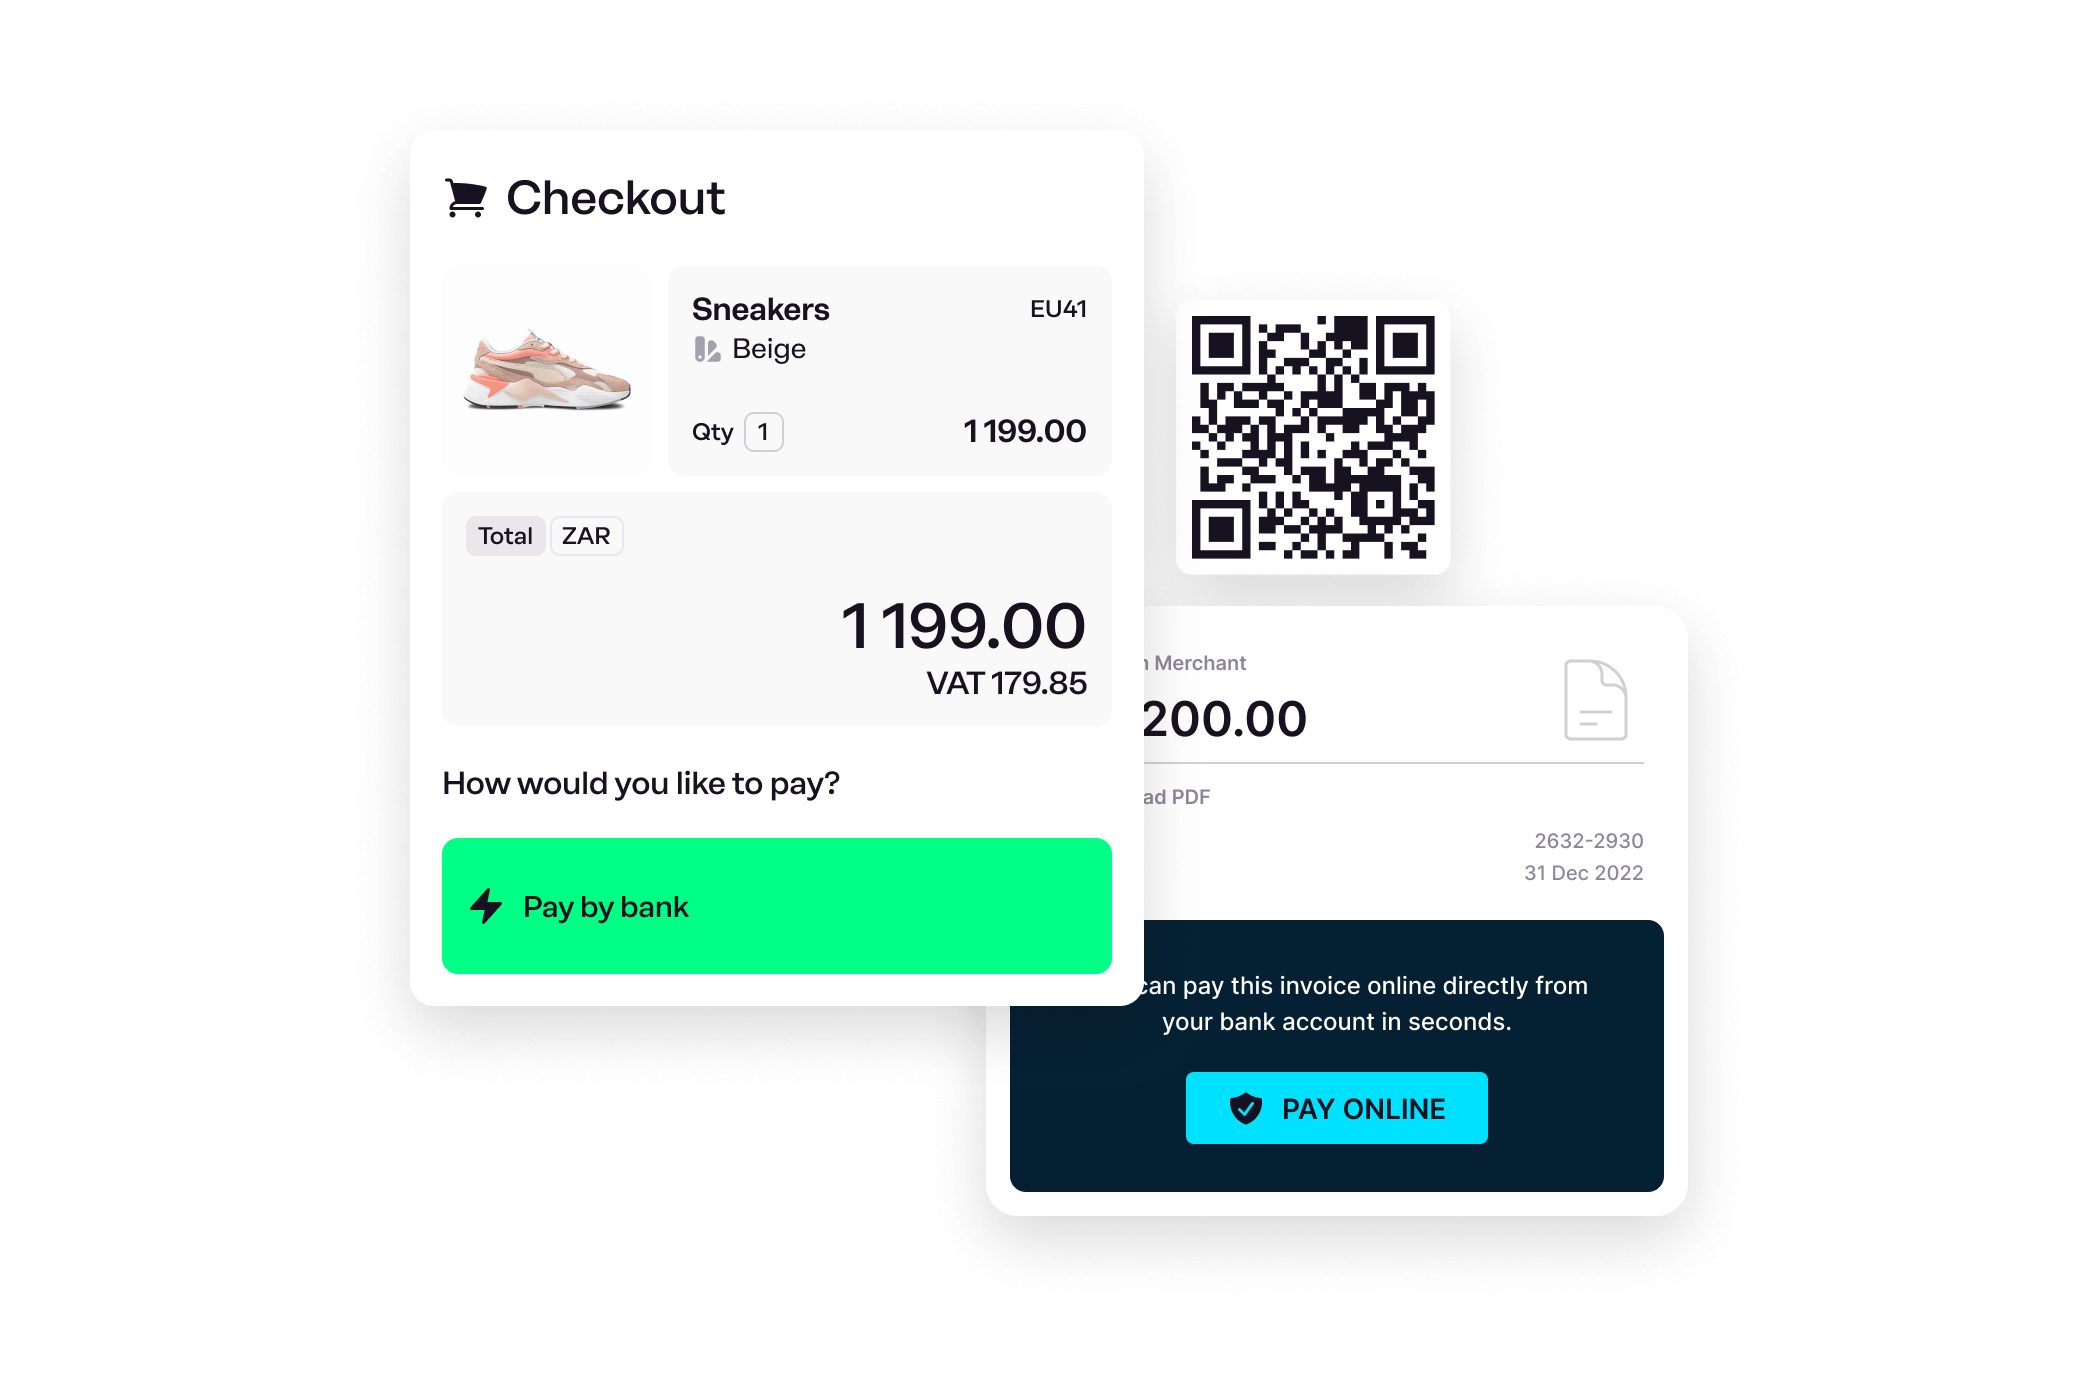 Stitch Pay by bank in a checkout screen, with QR code or payment link